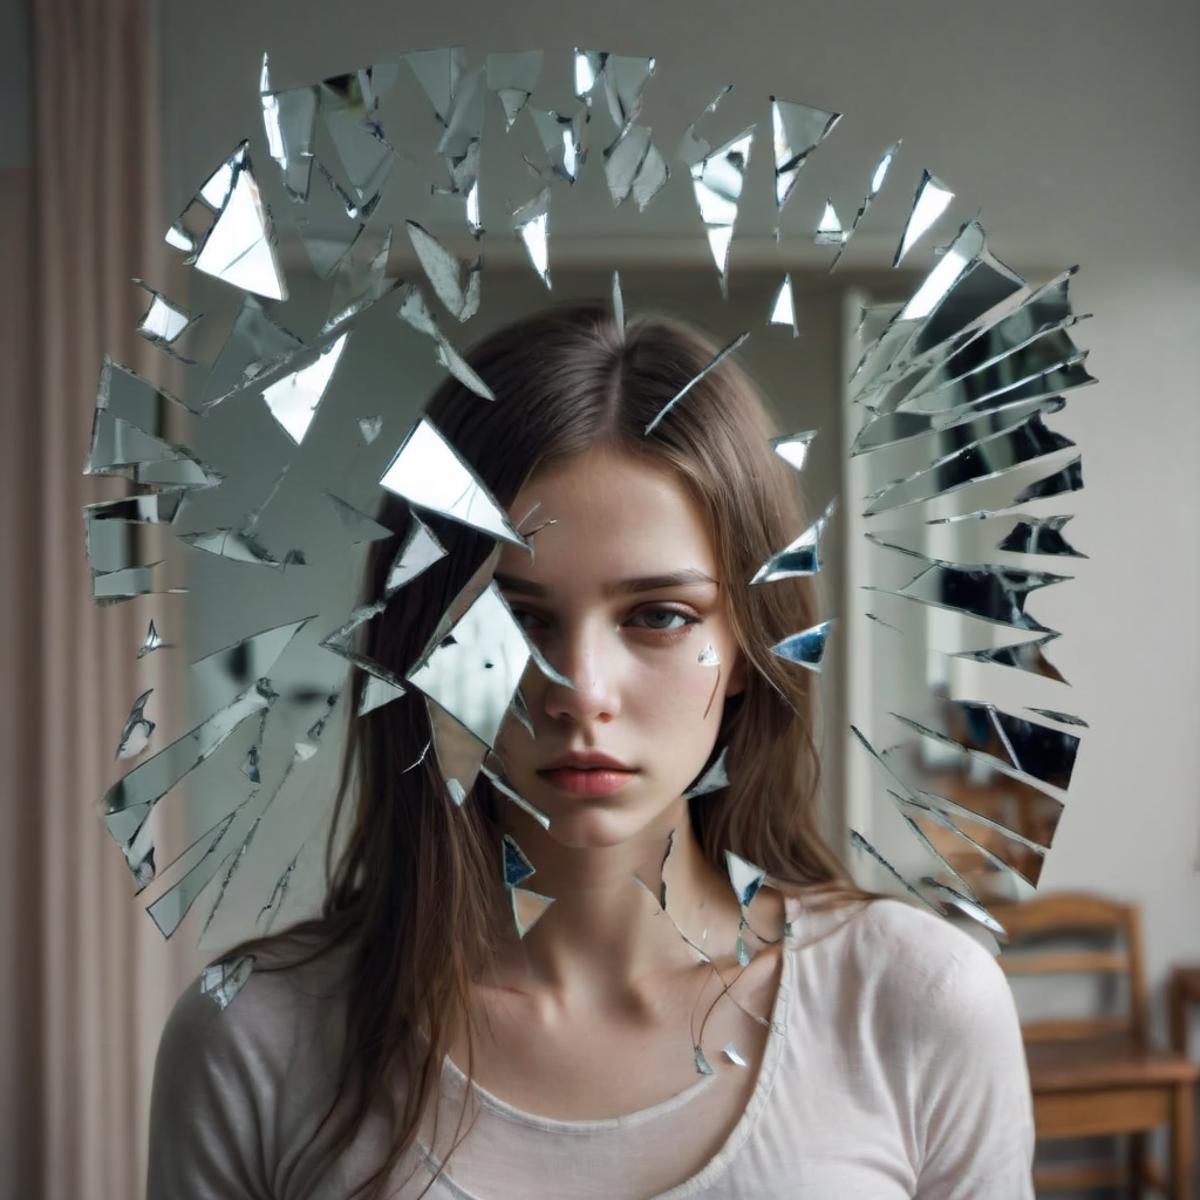 A young woman with glass shards in her hair.